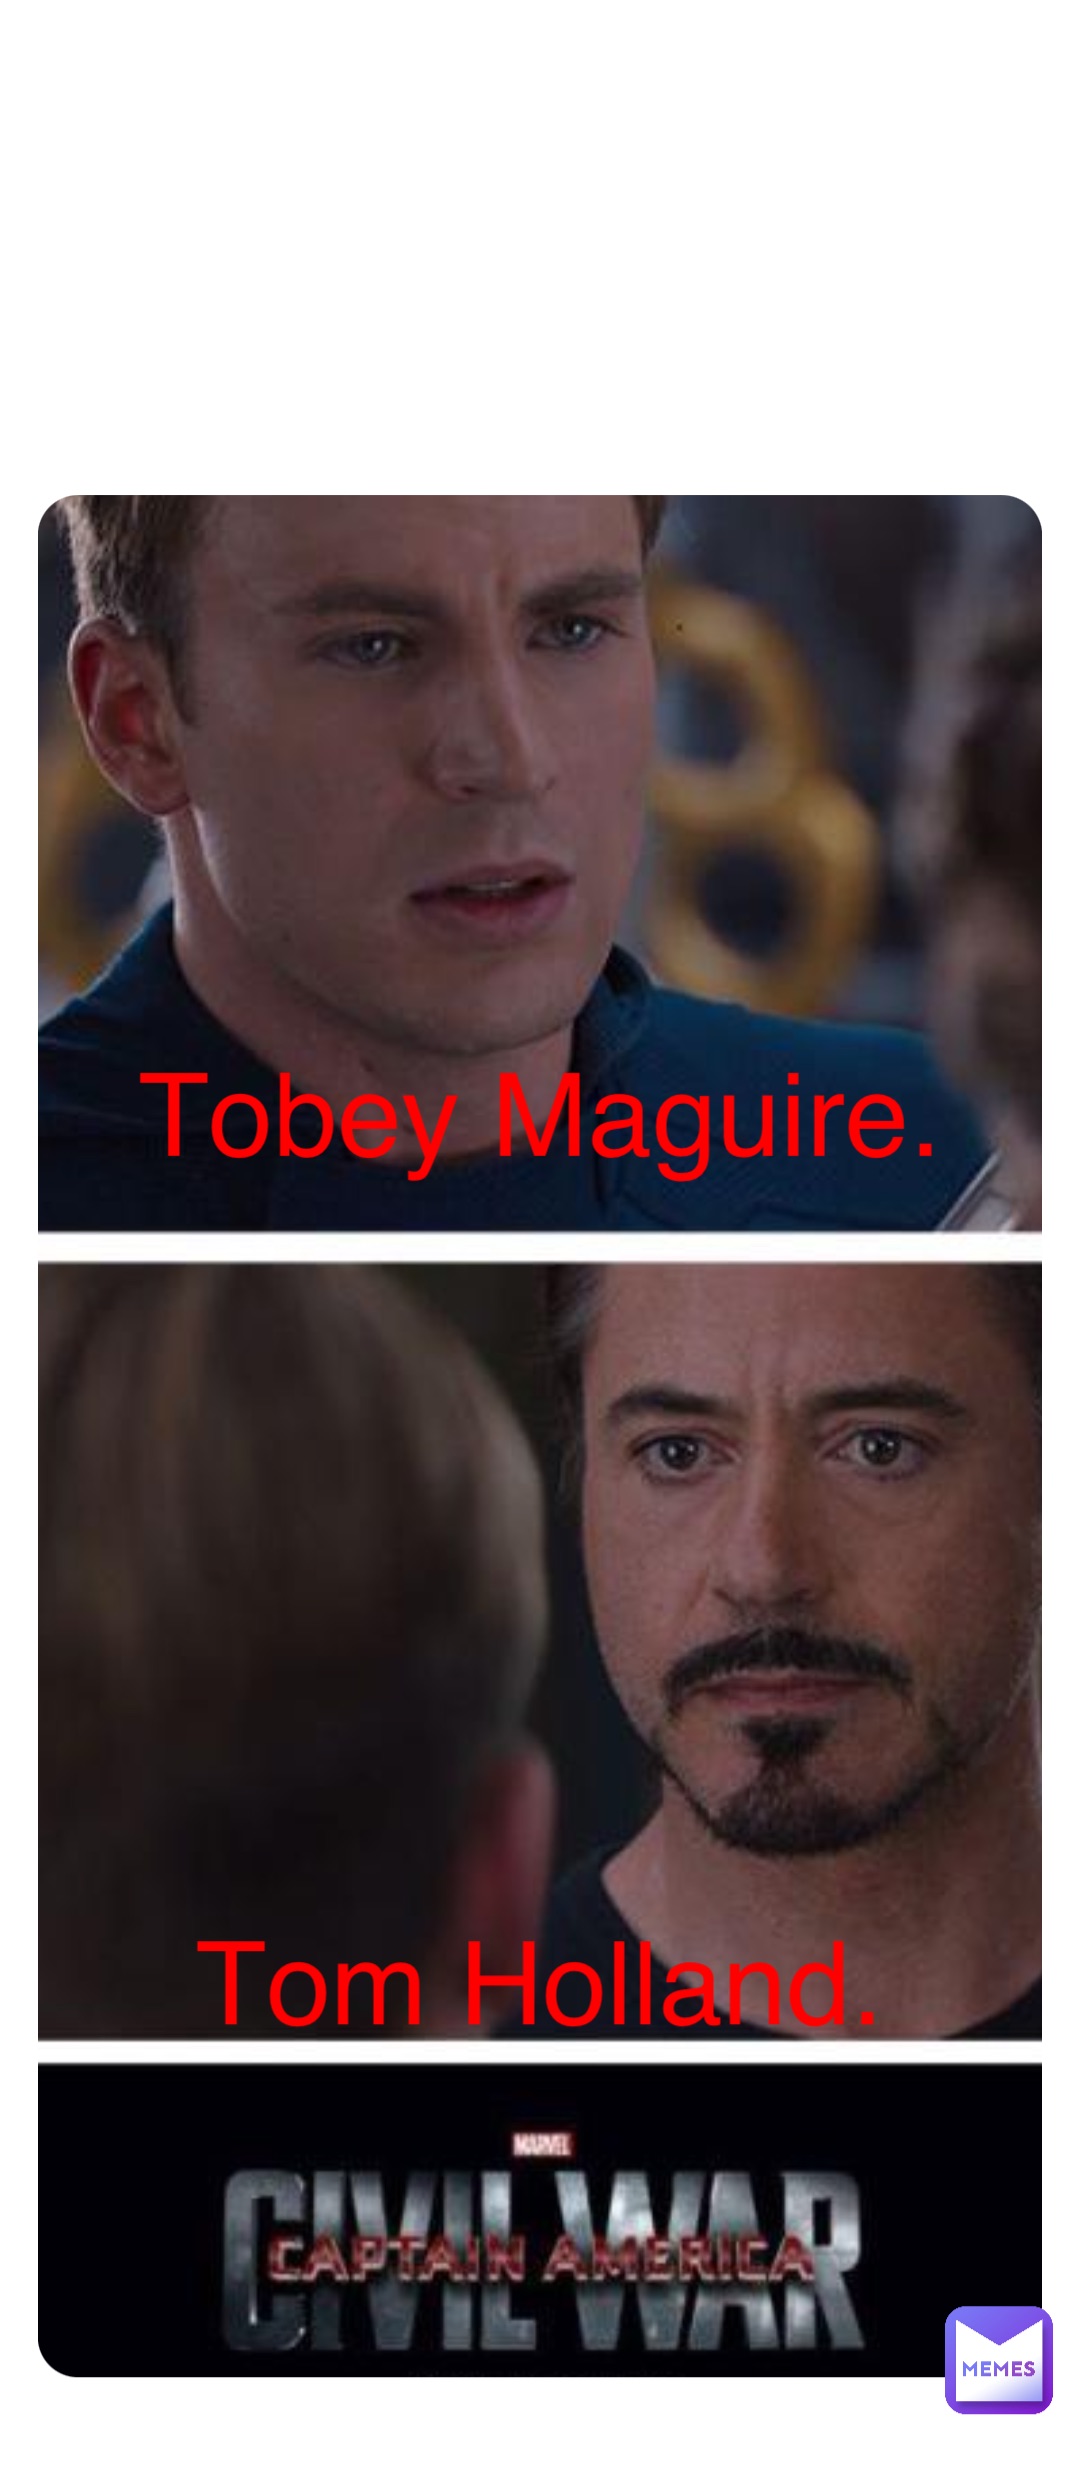 Double tap to edit Tobey Maguire. Tom Holland.